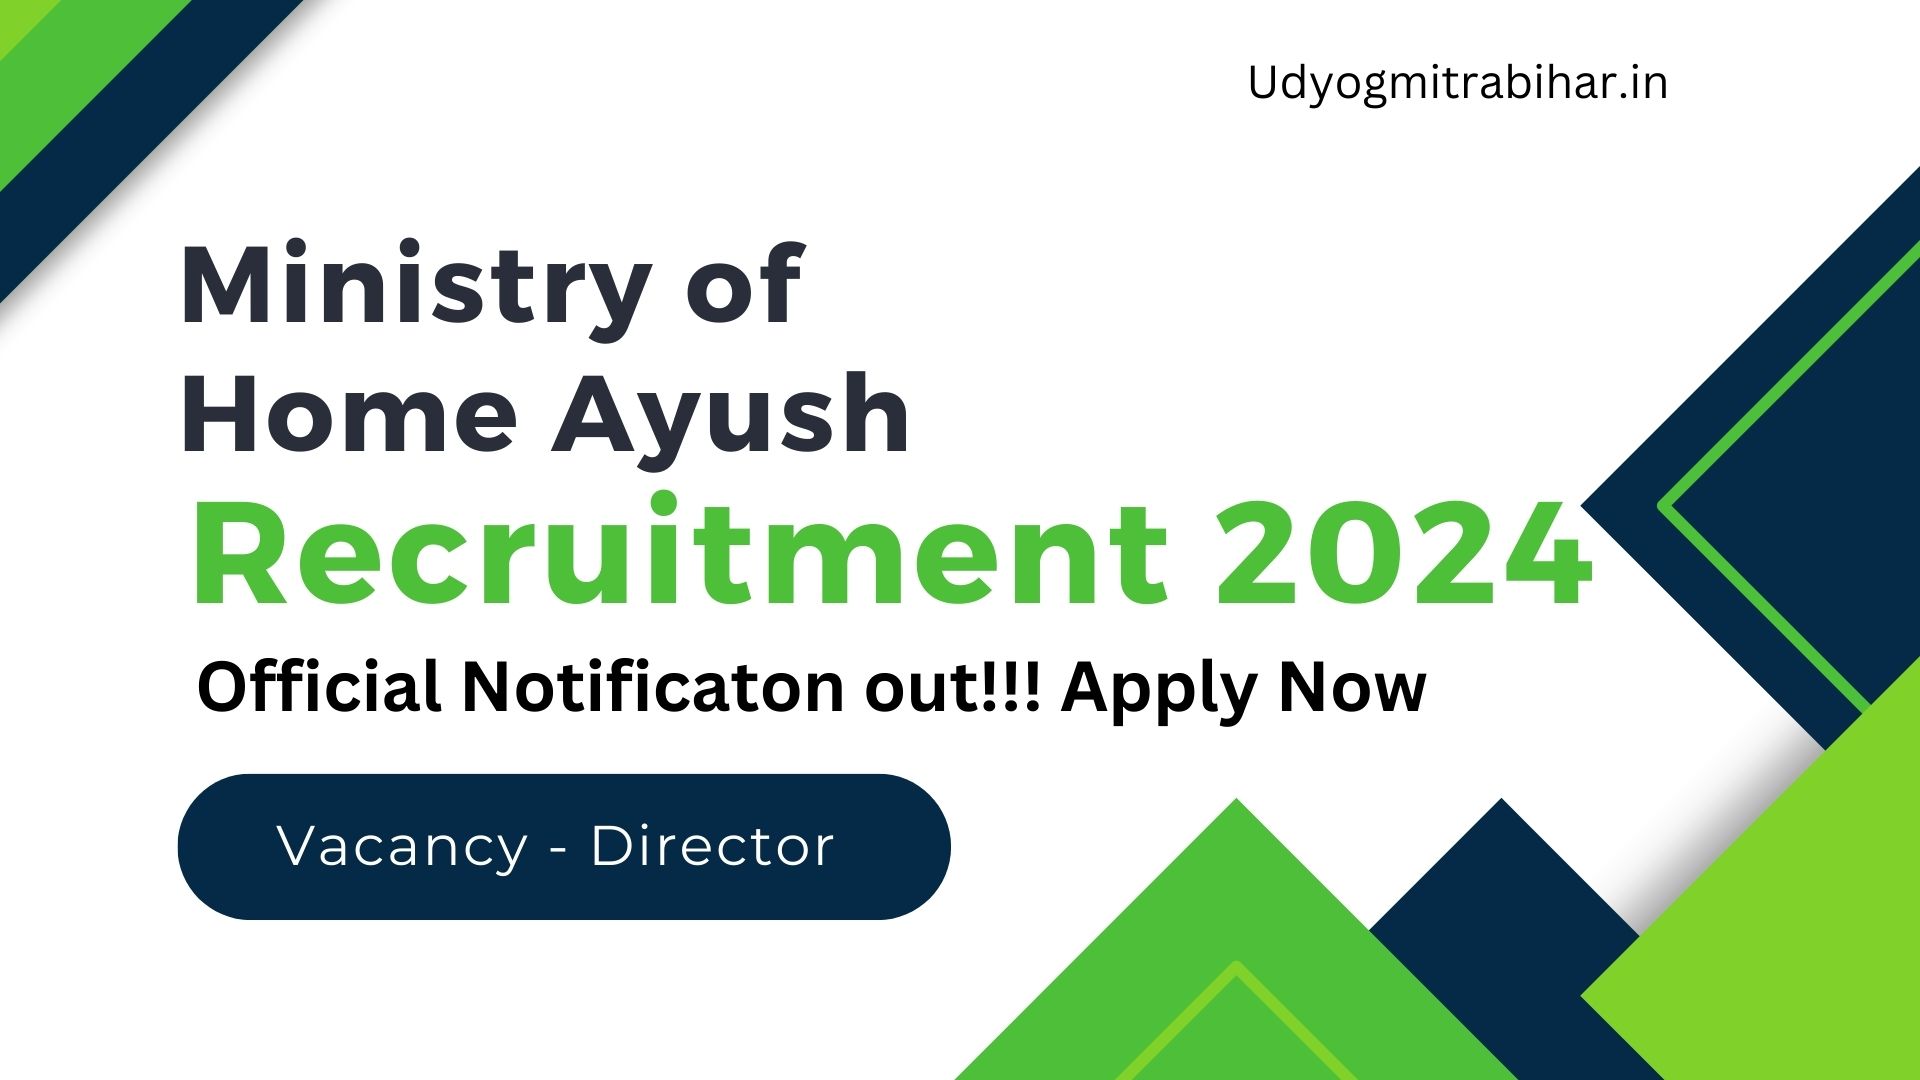 Ministry of Home Ayush Recruitment for Director Post 2024, Salary Up To 2,18,200, Apply Now, Eligibility Criteria, Required Documents